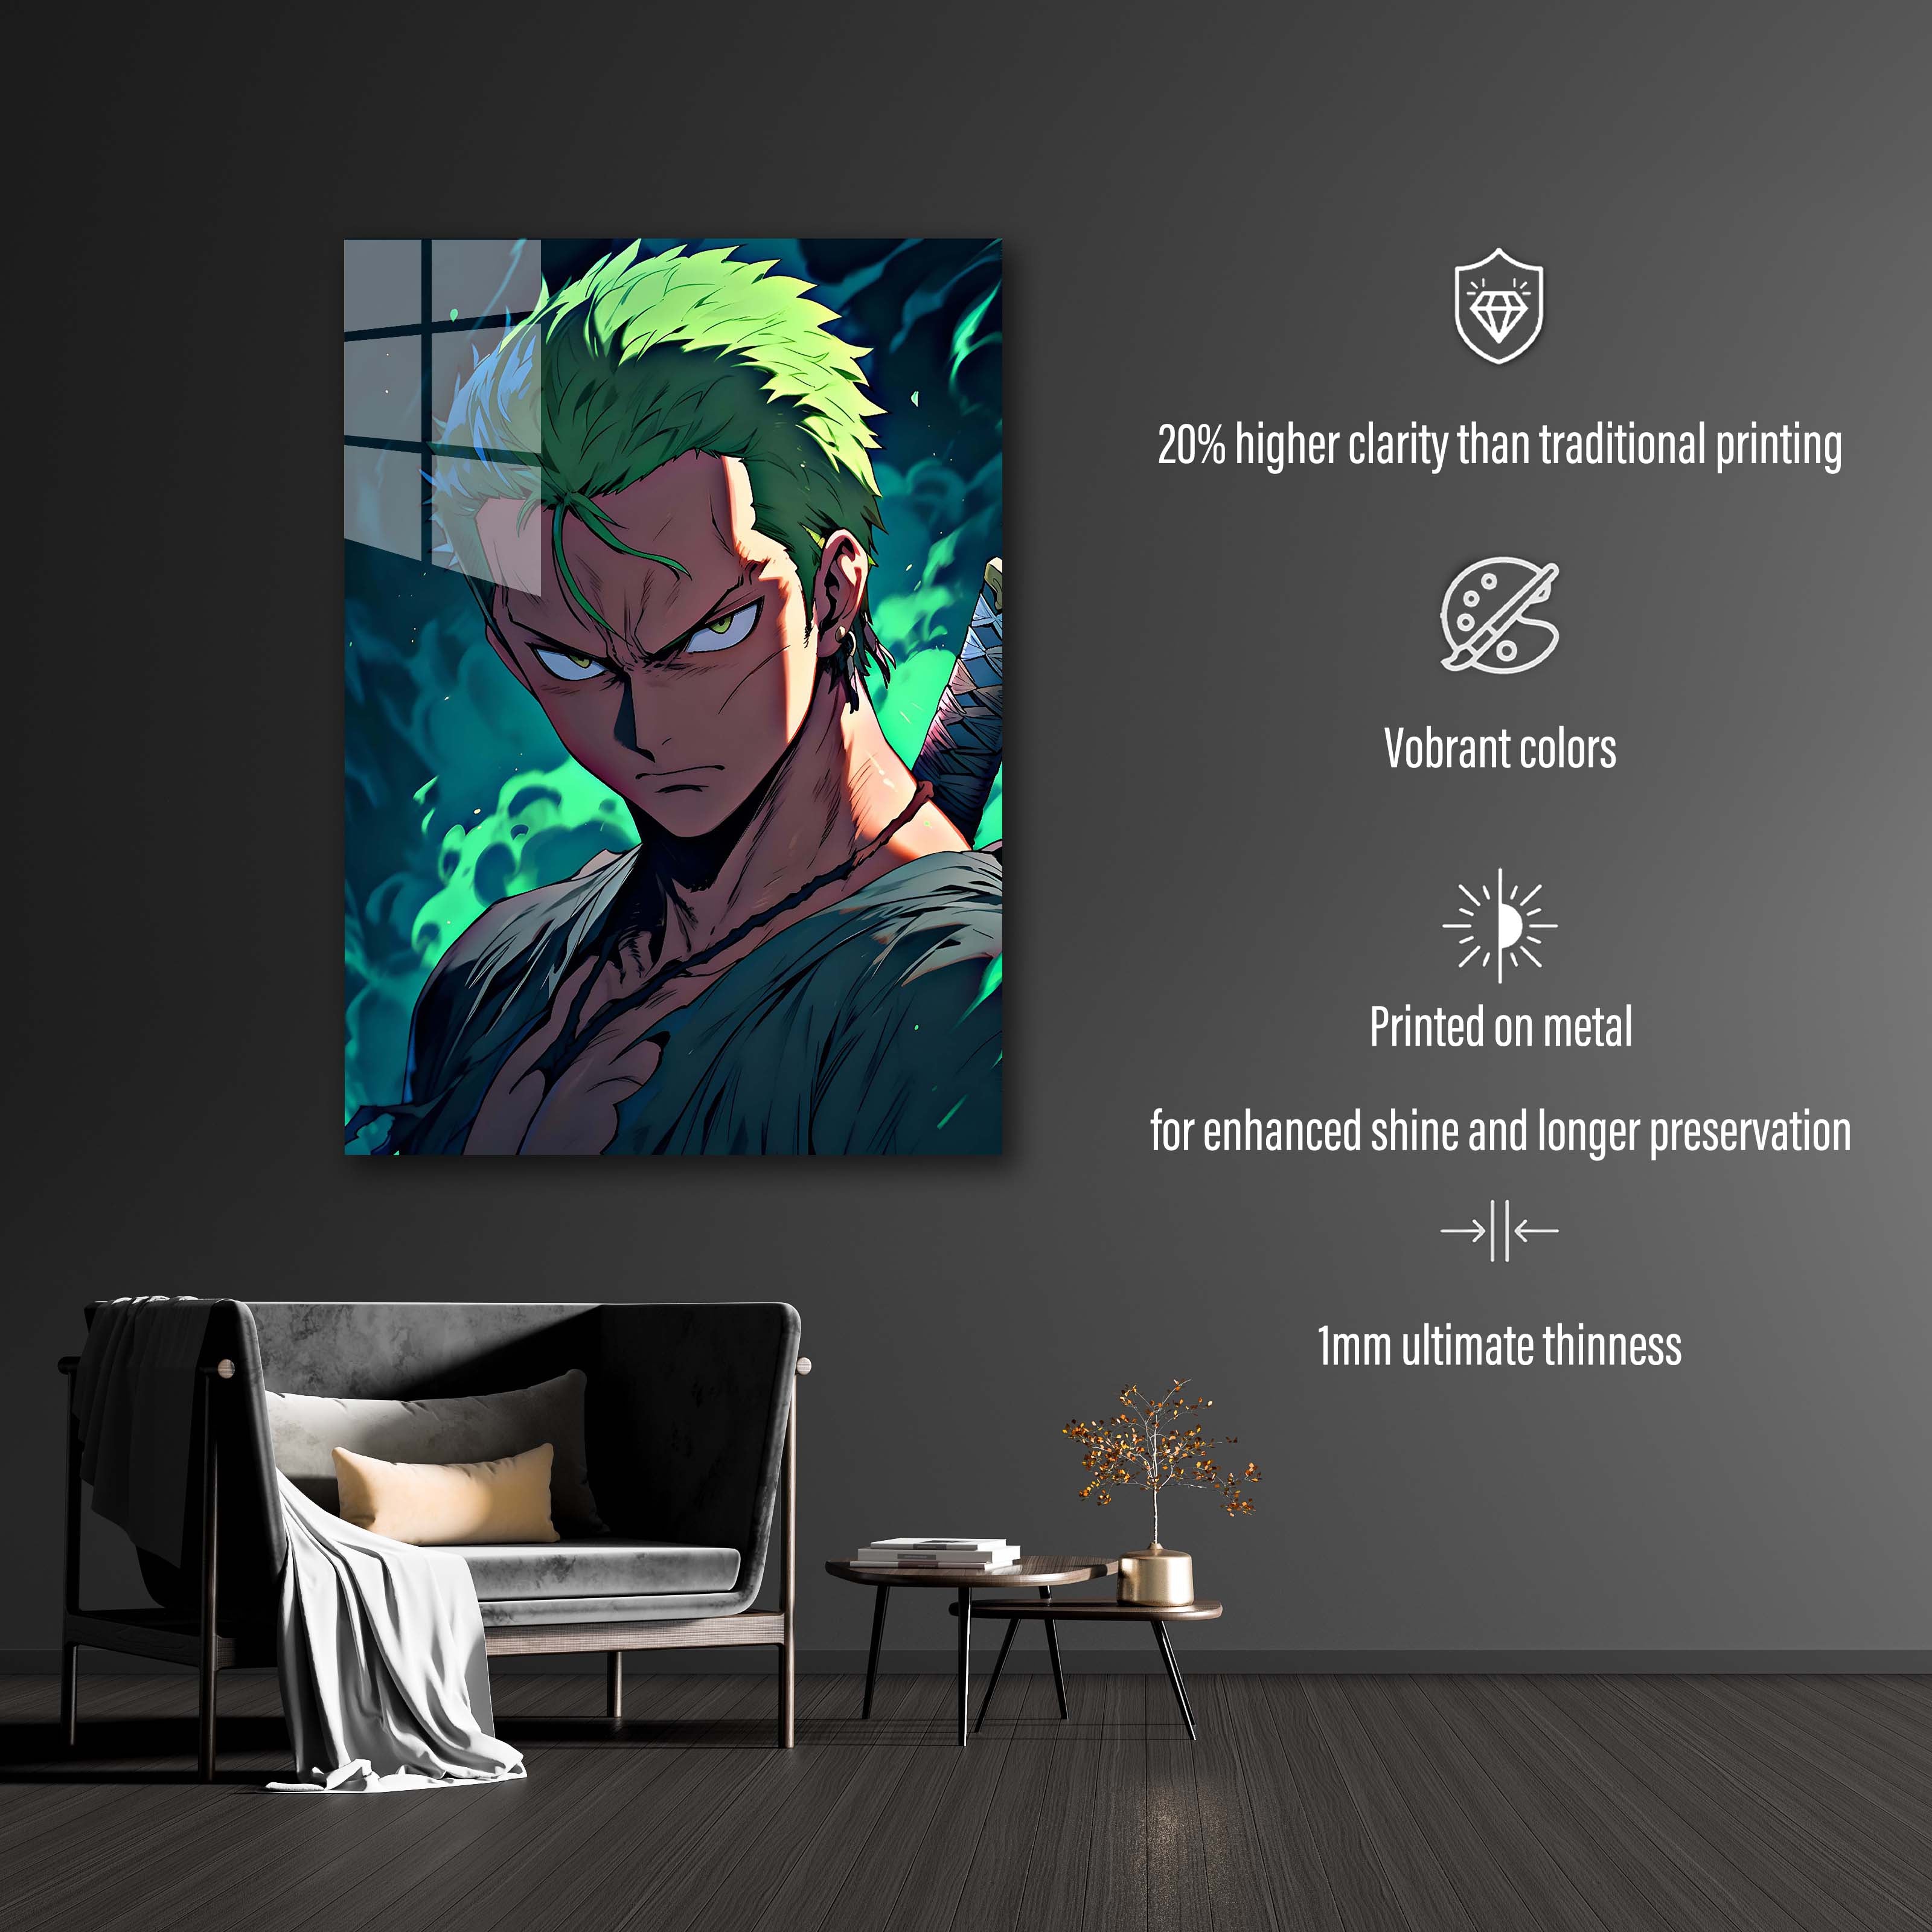 Zoro angry from one piece-designed by @Vid_M@tion